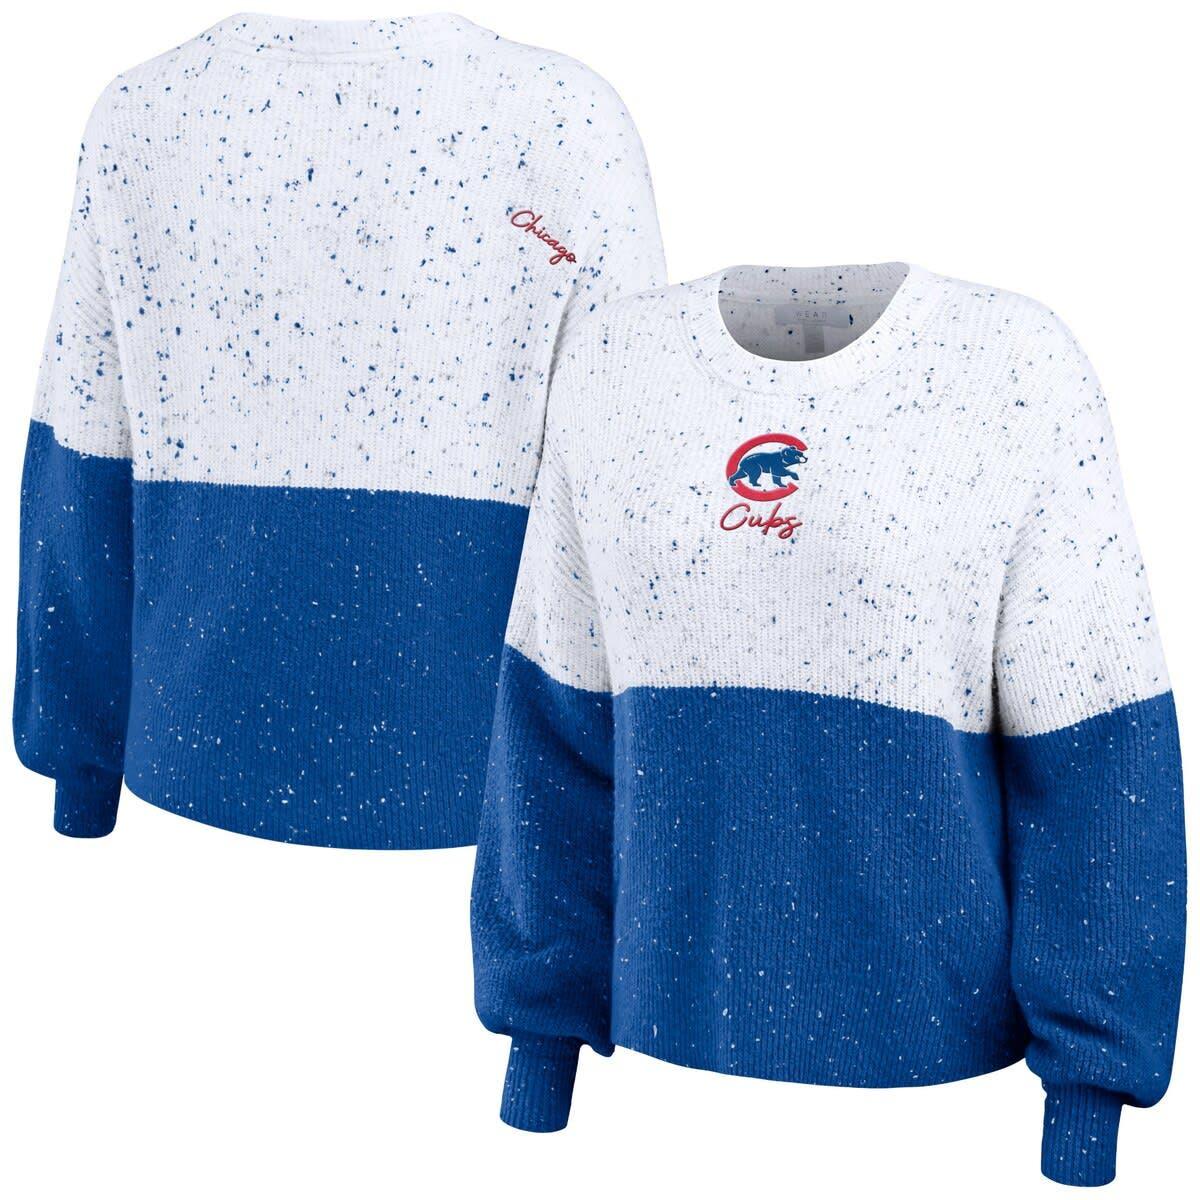 Chicago Cubs Pinstripe Crew Neck Pullover - Royal